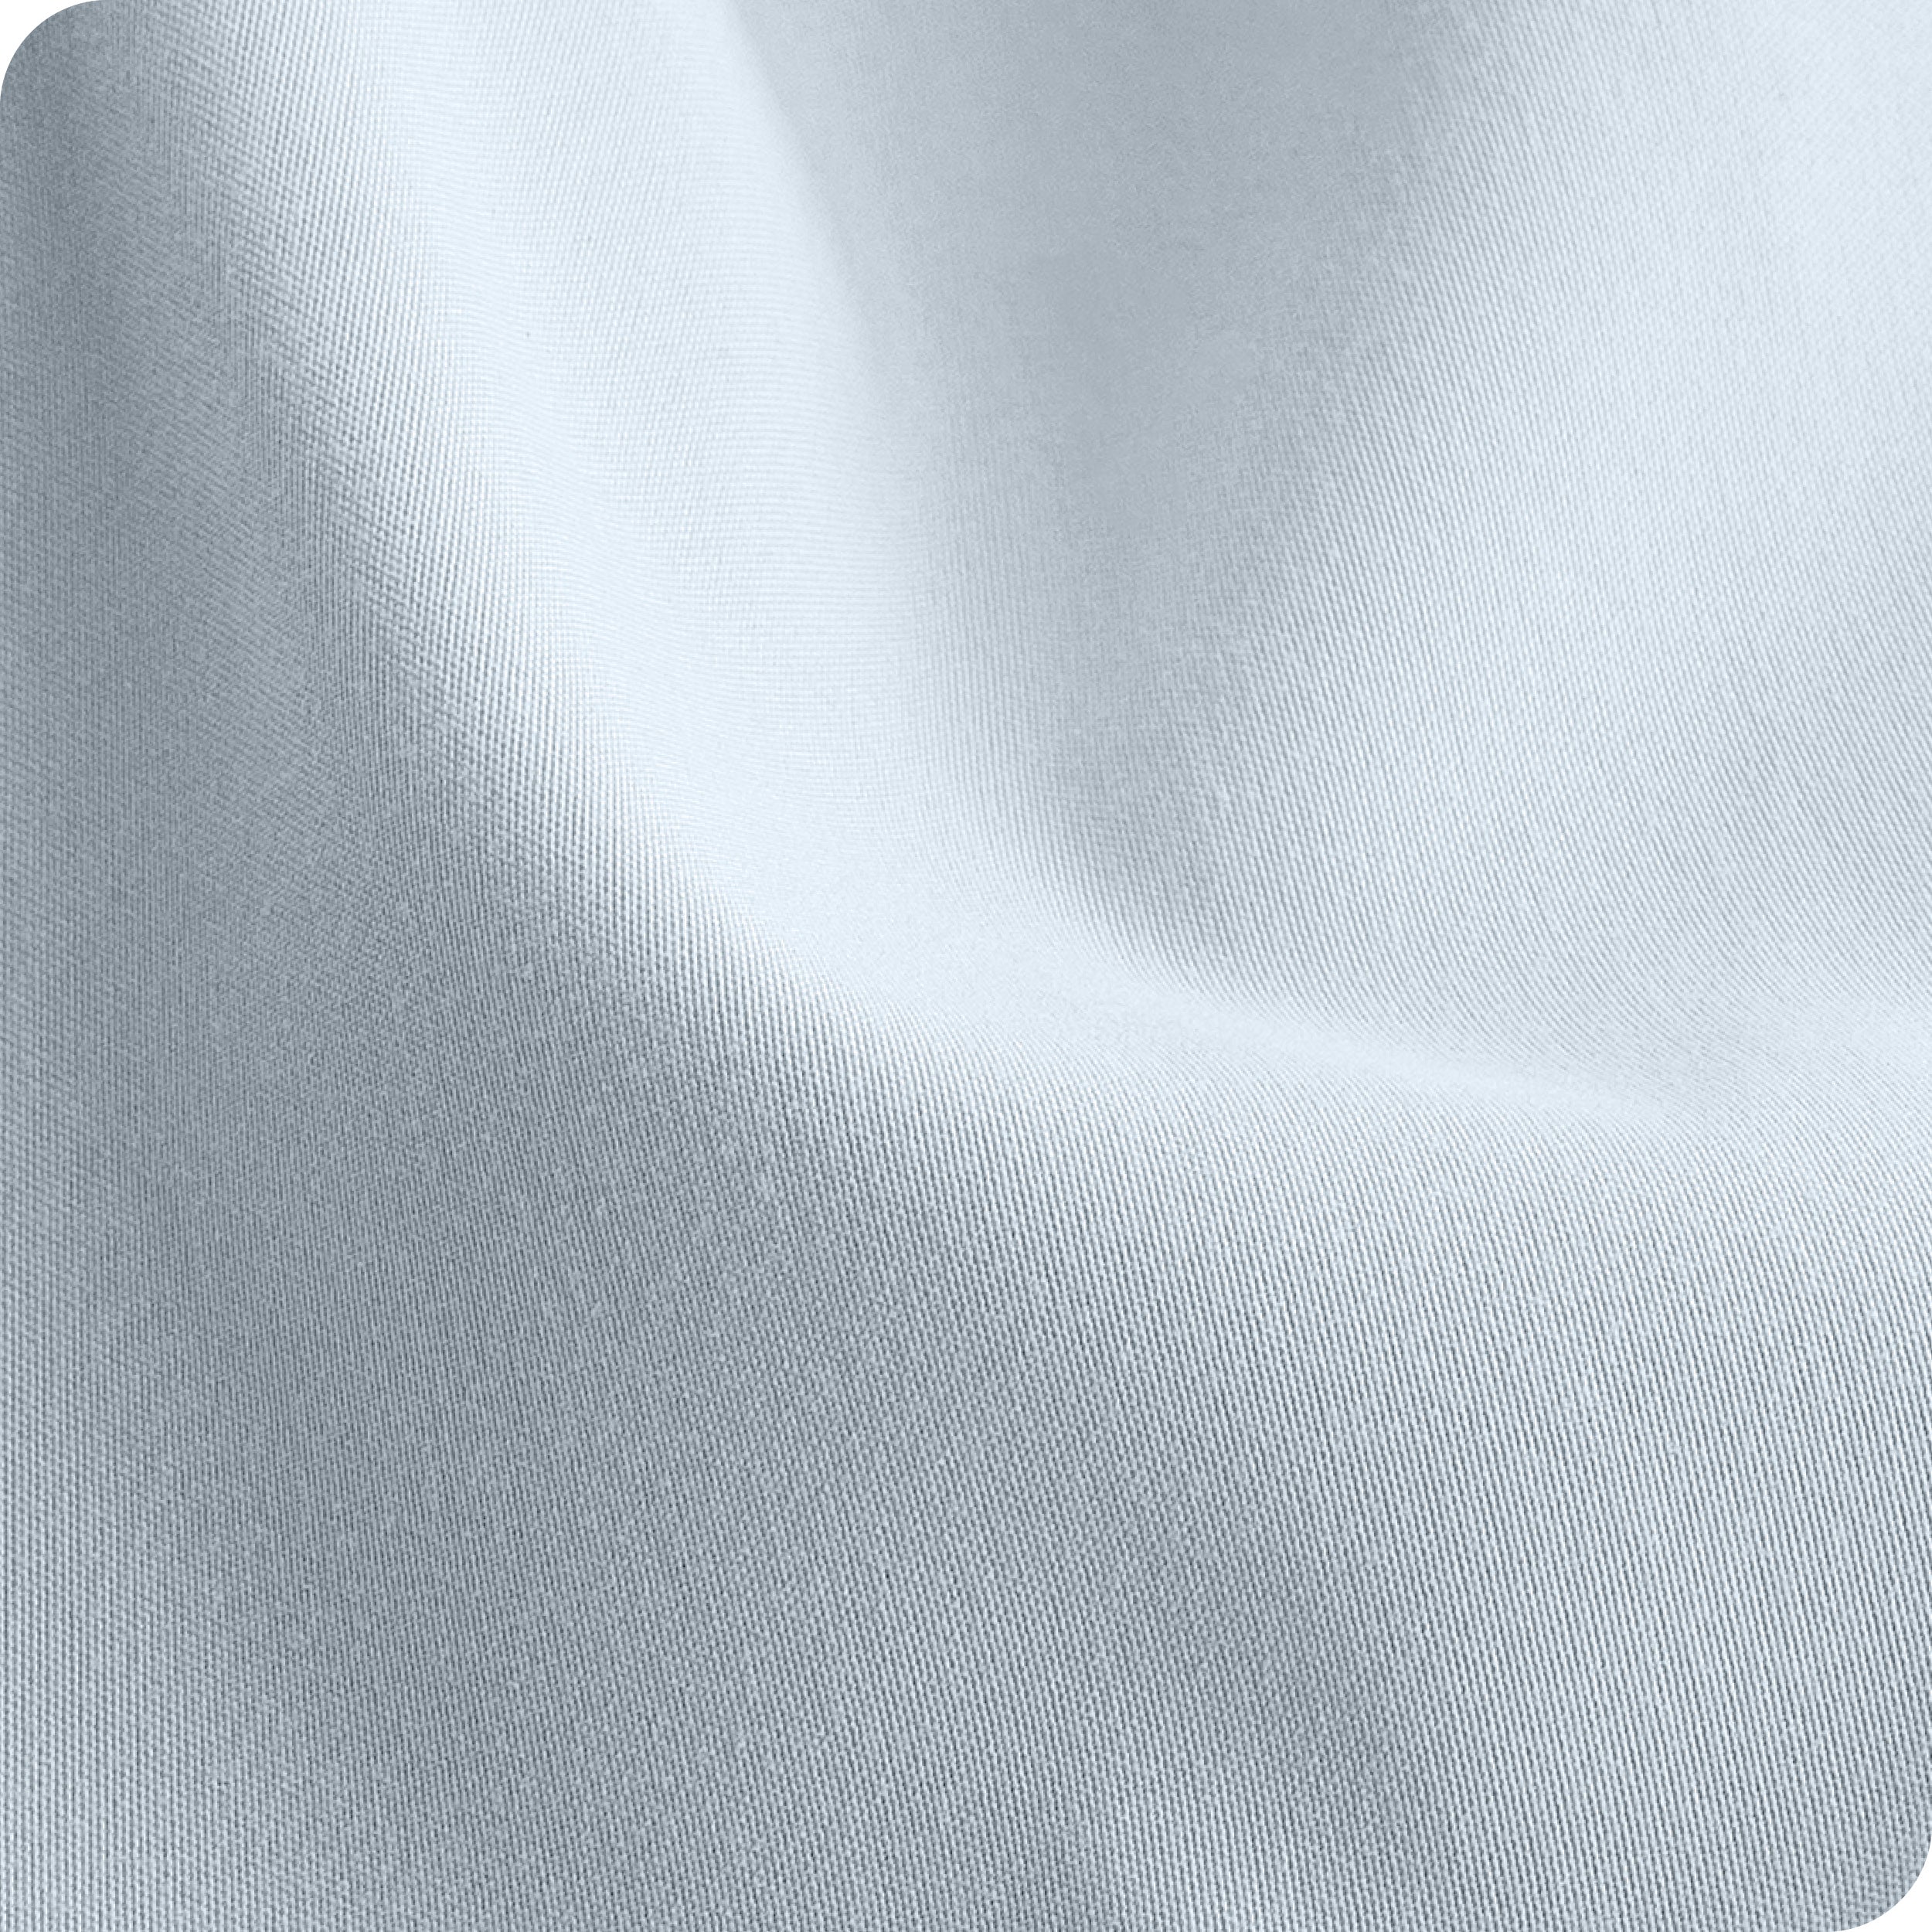 Close up of the fabric of a crib fitted sheet